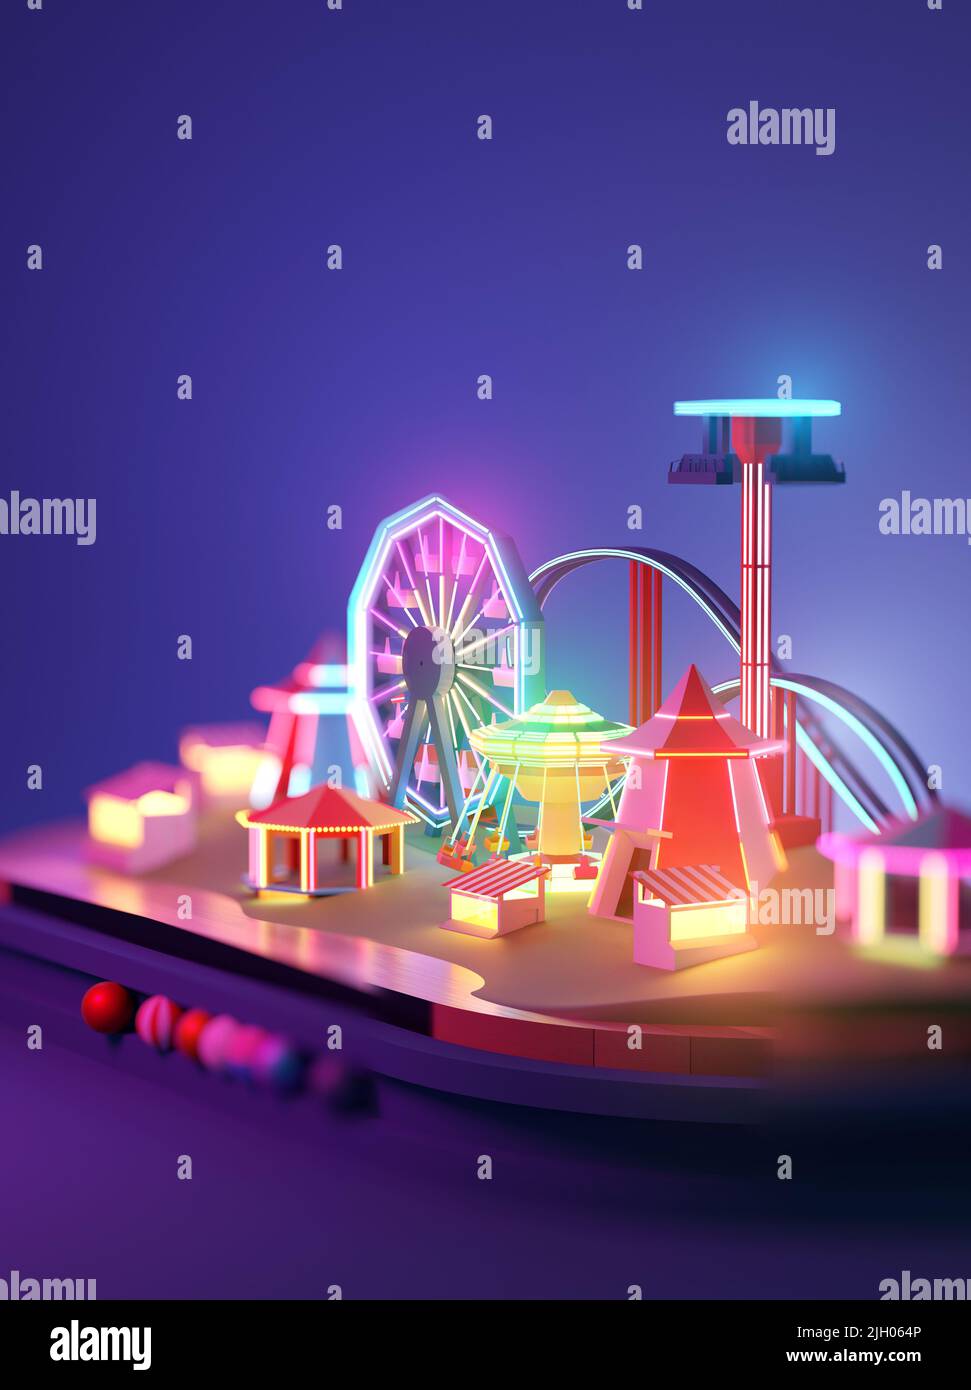 Fairground amusement park filled with rides and attractions lit up with neon lights. 3D illustration. Stock Photo